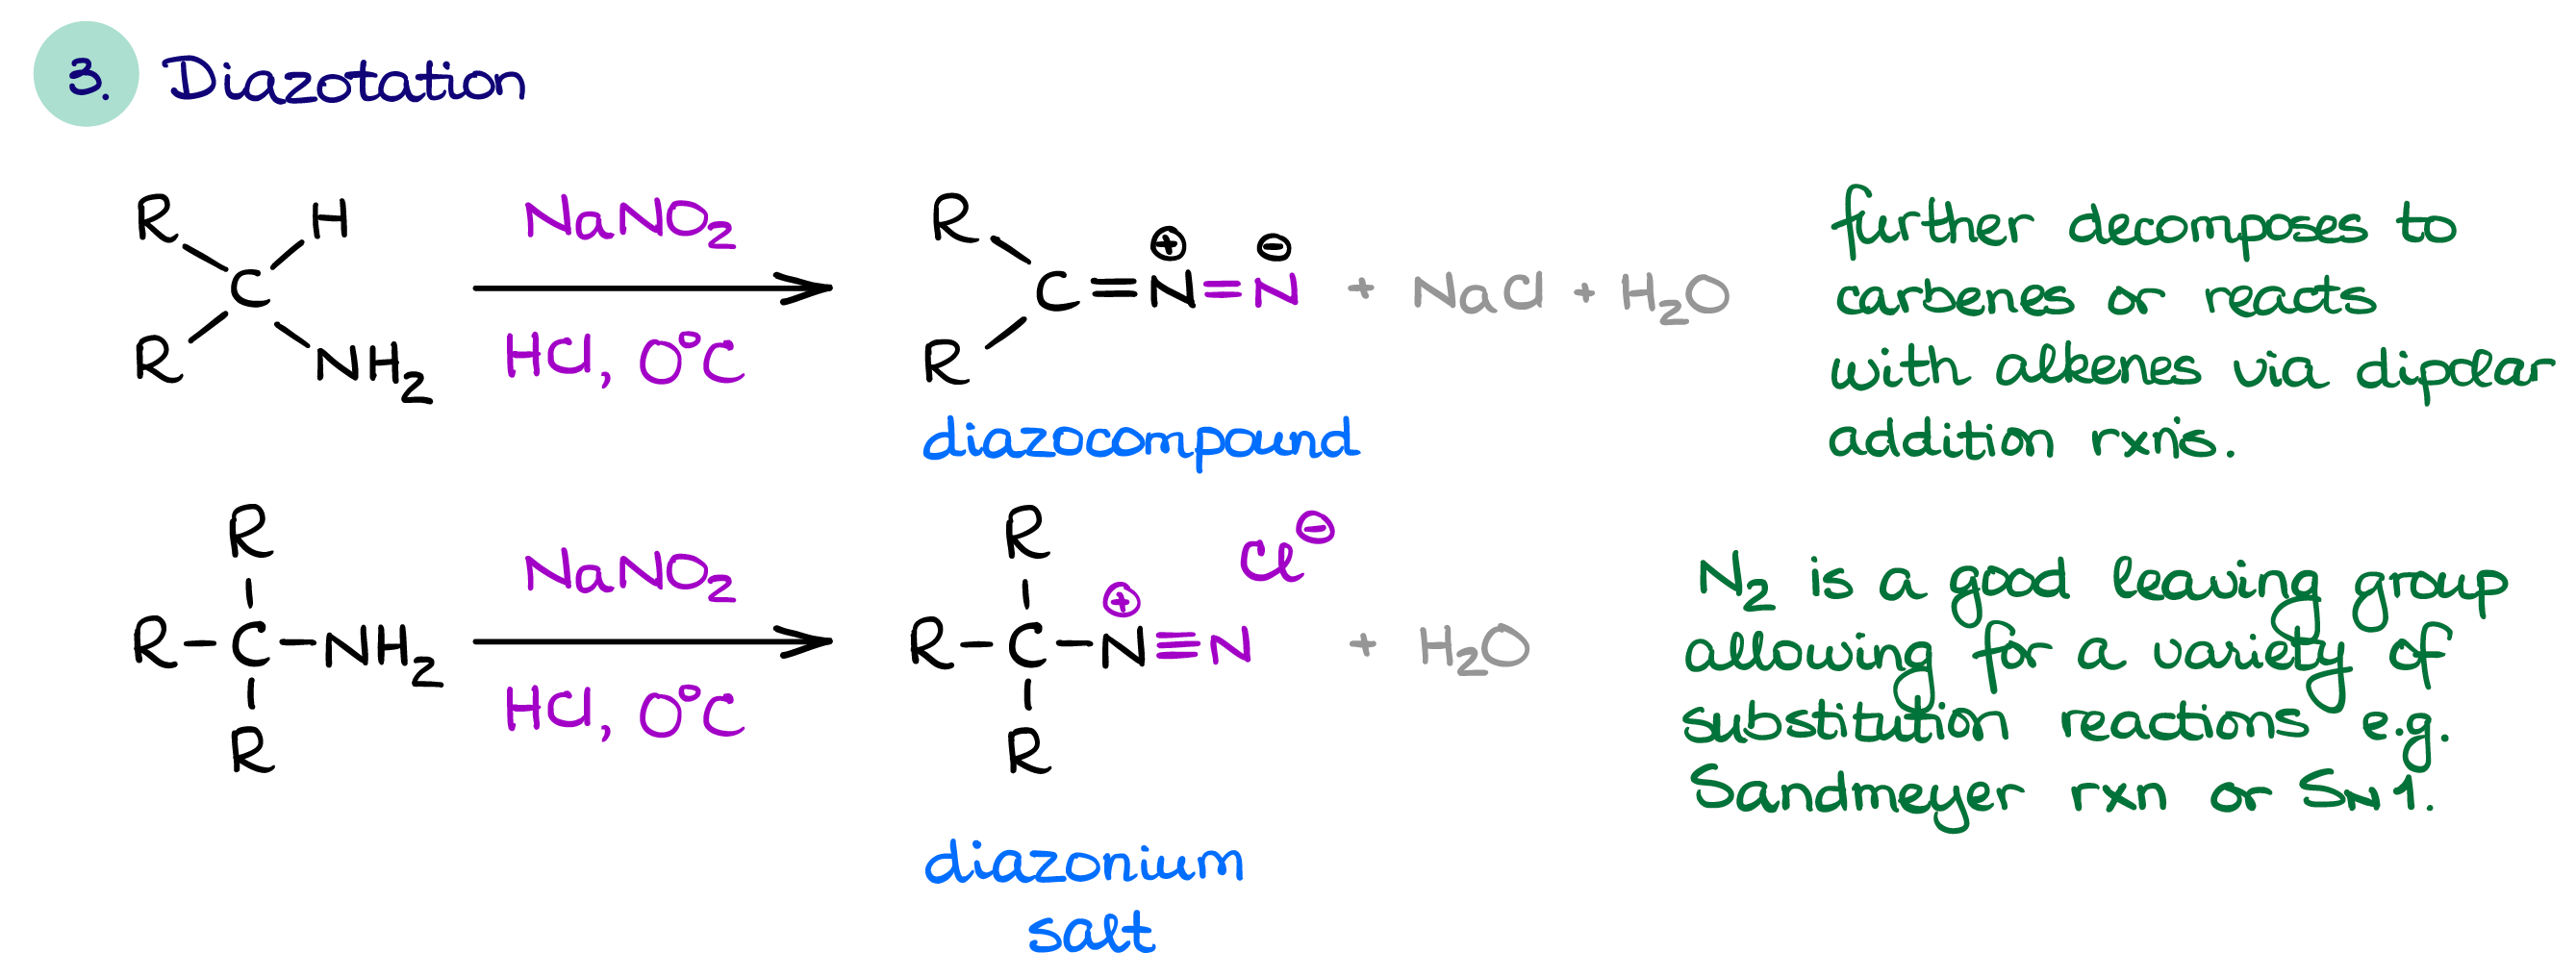 diazotation reaction of amines